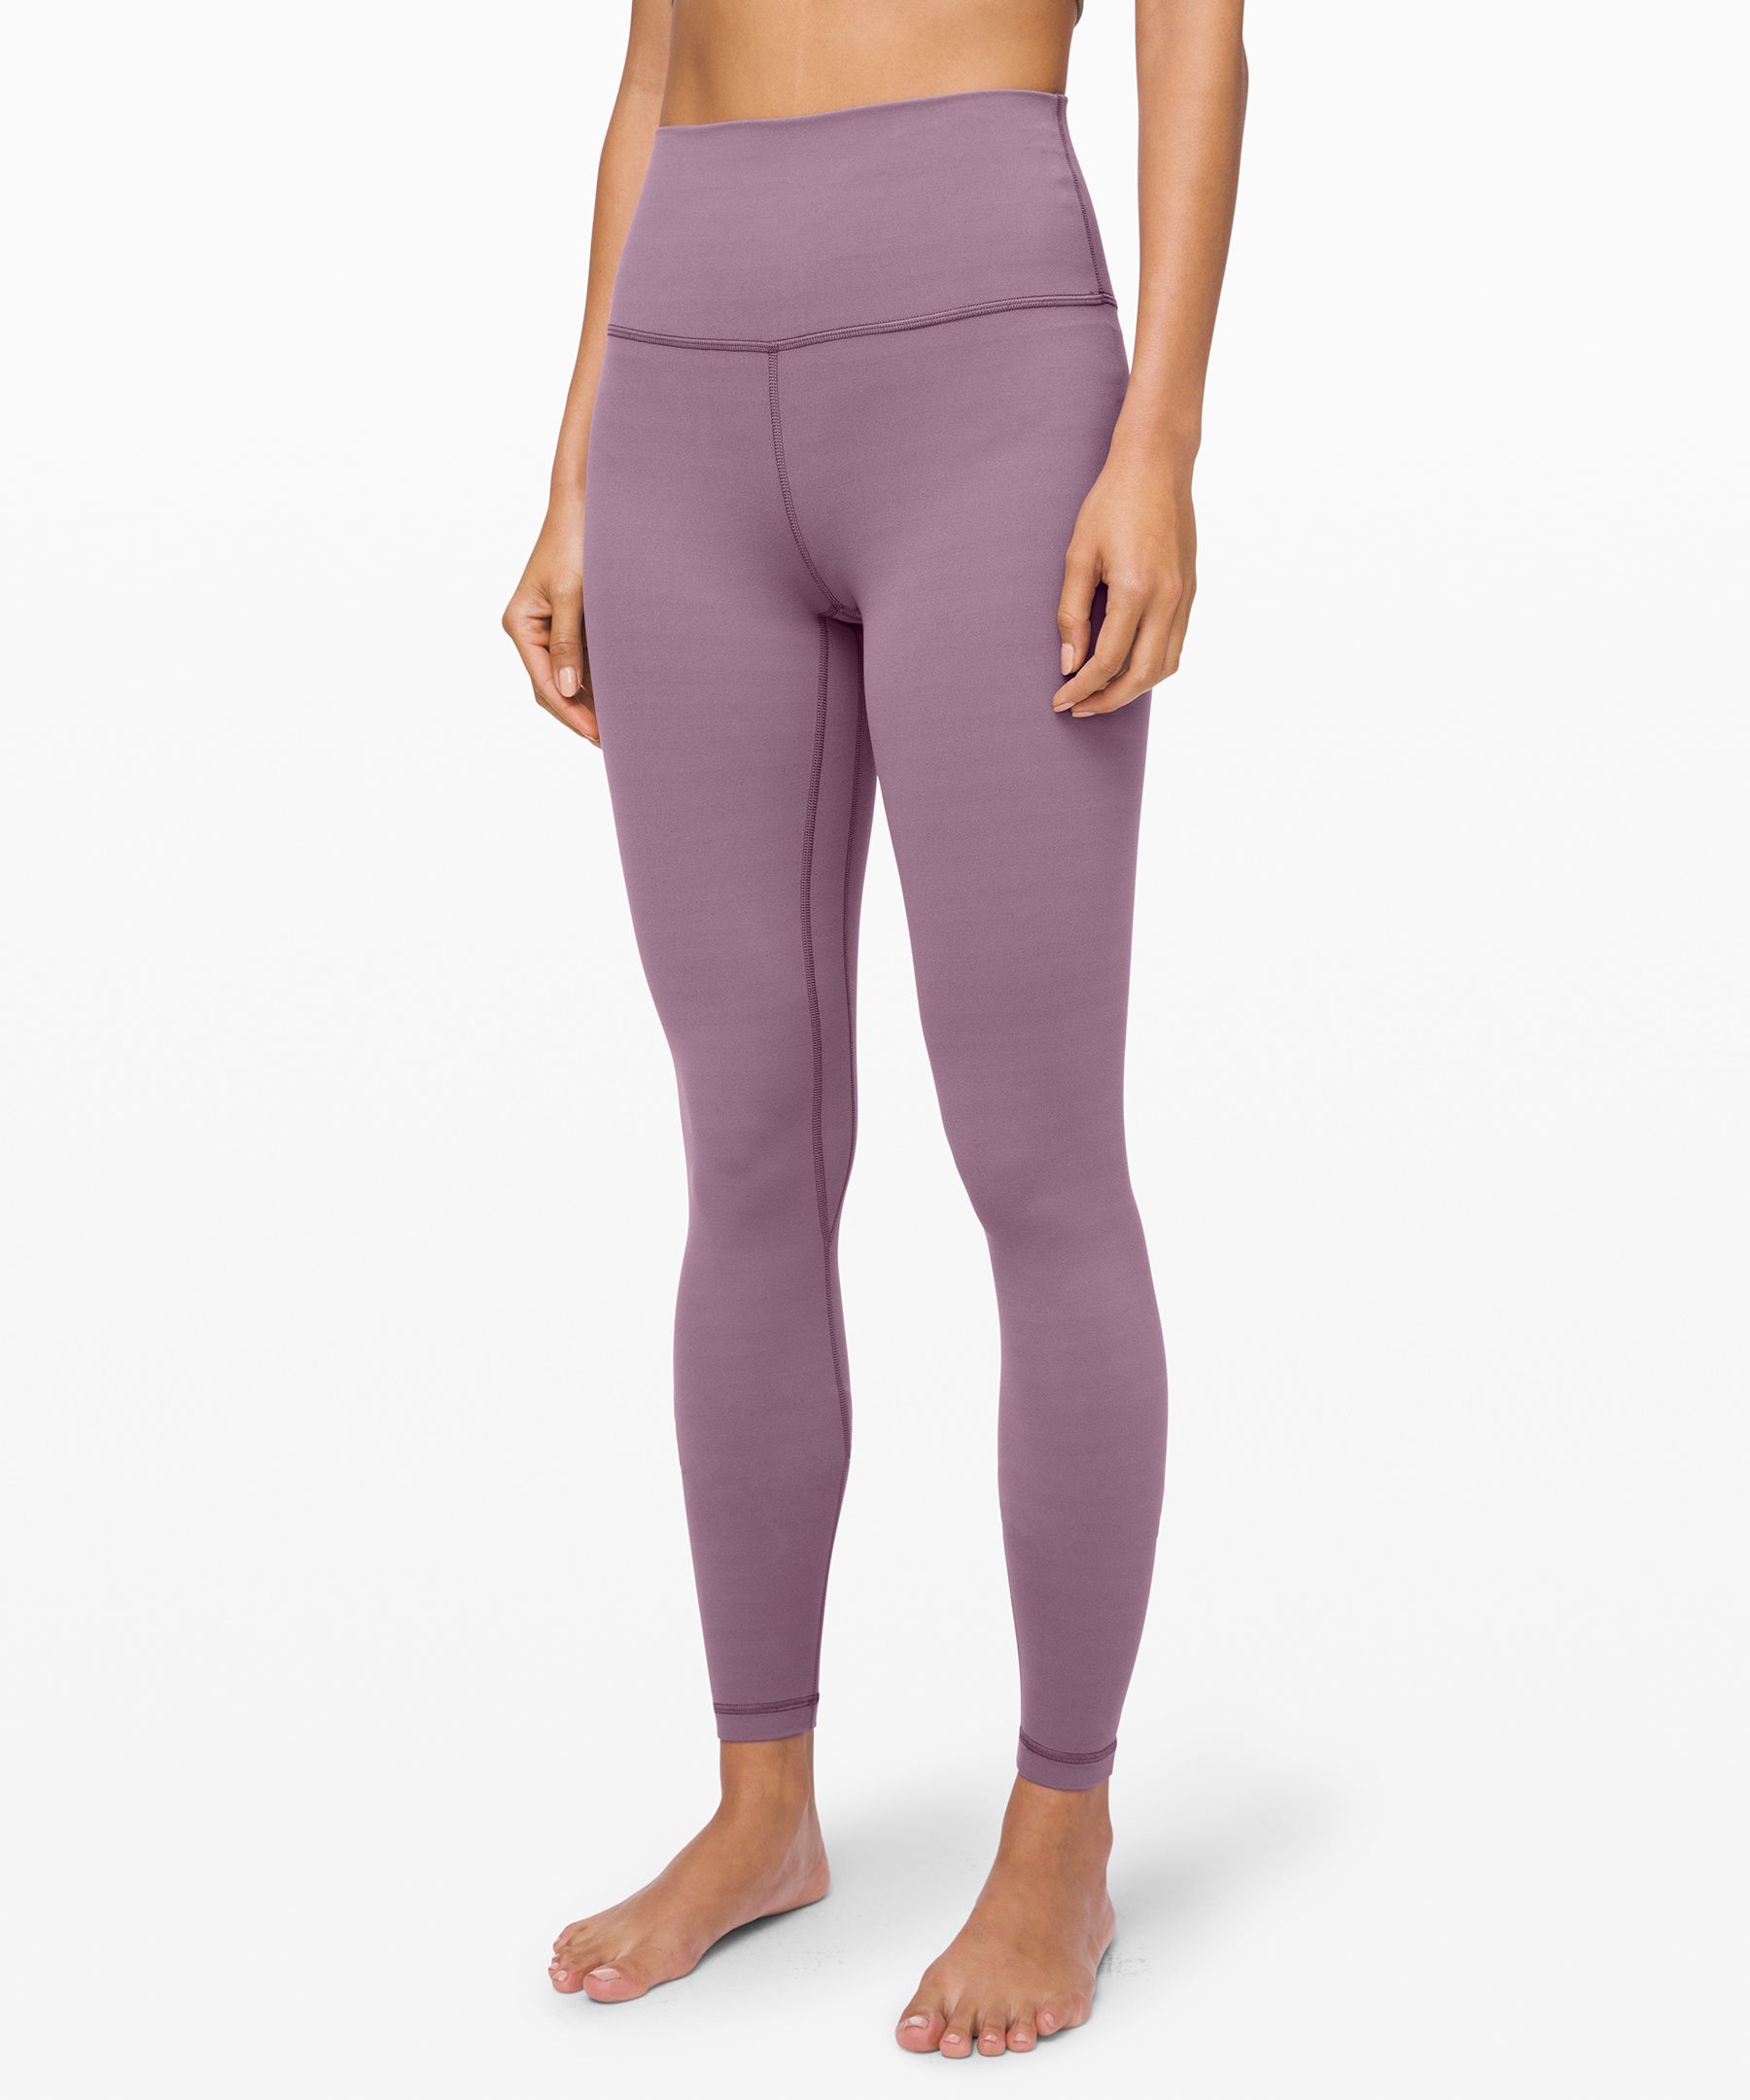 Lululemon Align Pant 31" *online Only In Frosted Mulberry